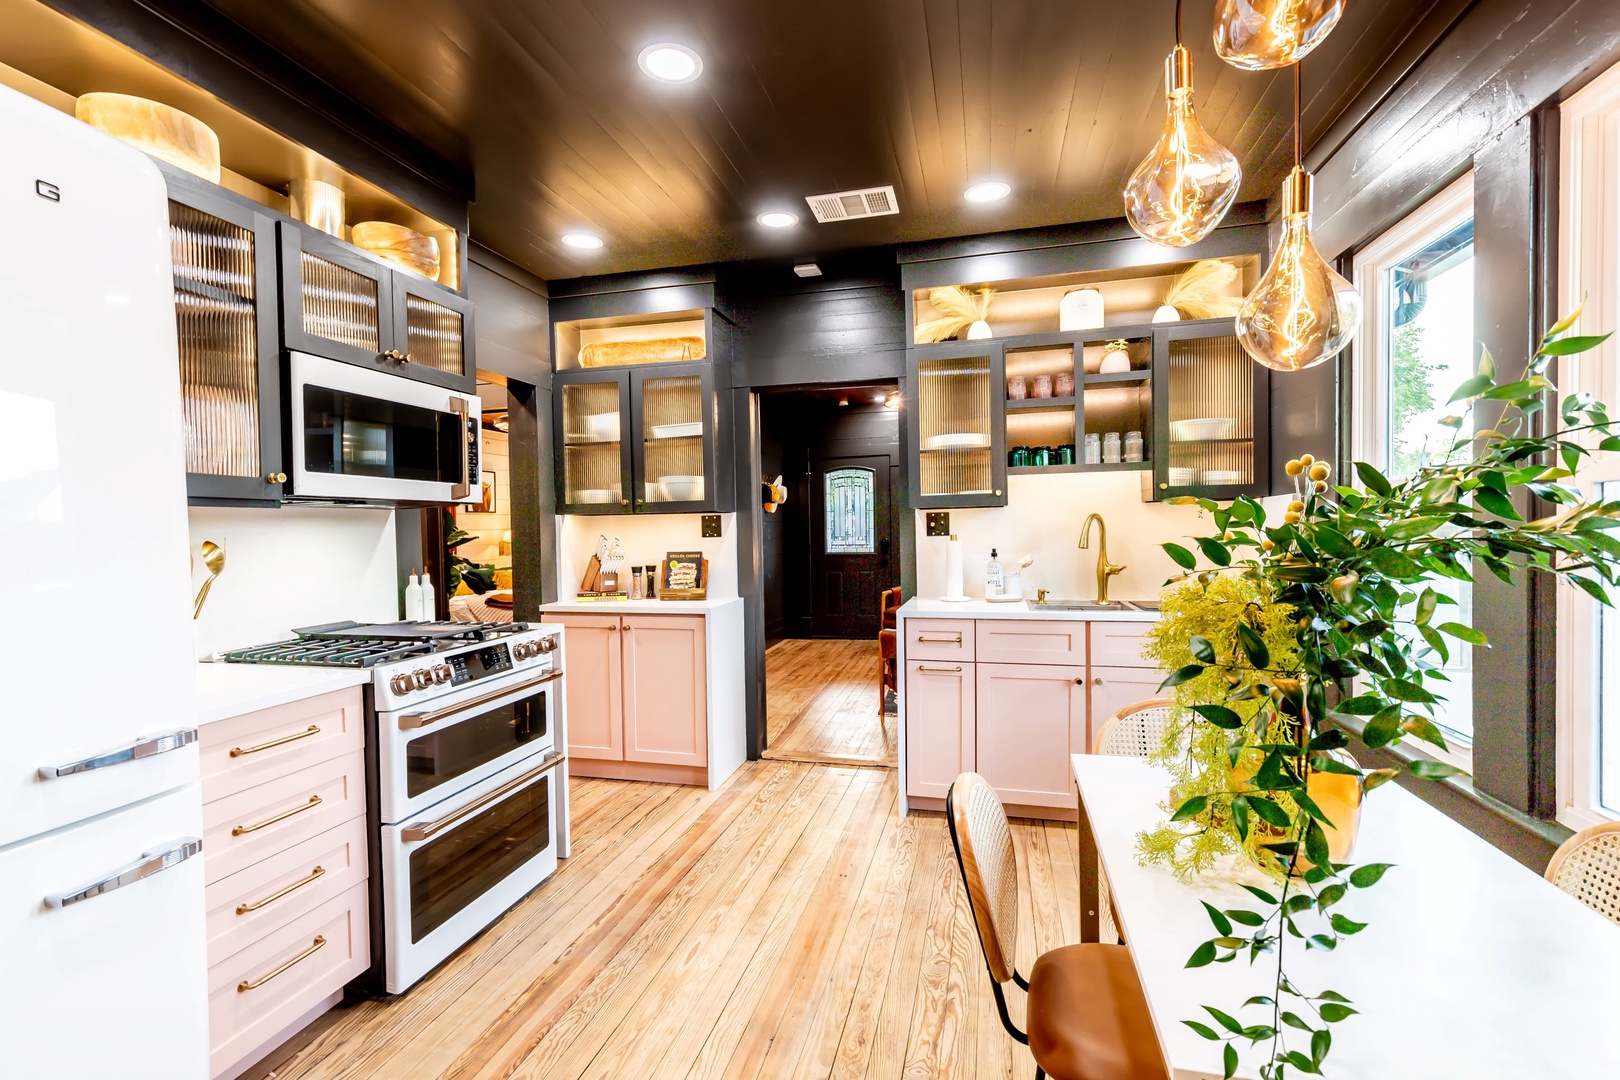 Elegant, retro finishes and incredible amenities in the kitchen are sure to delight